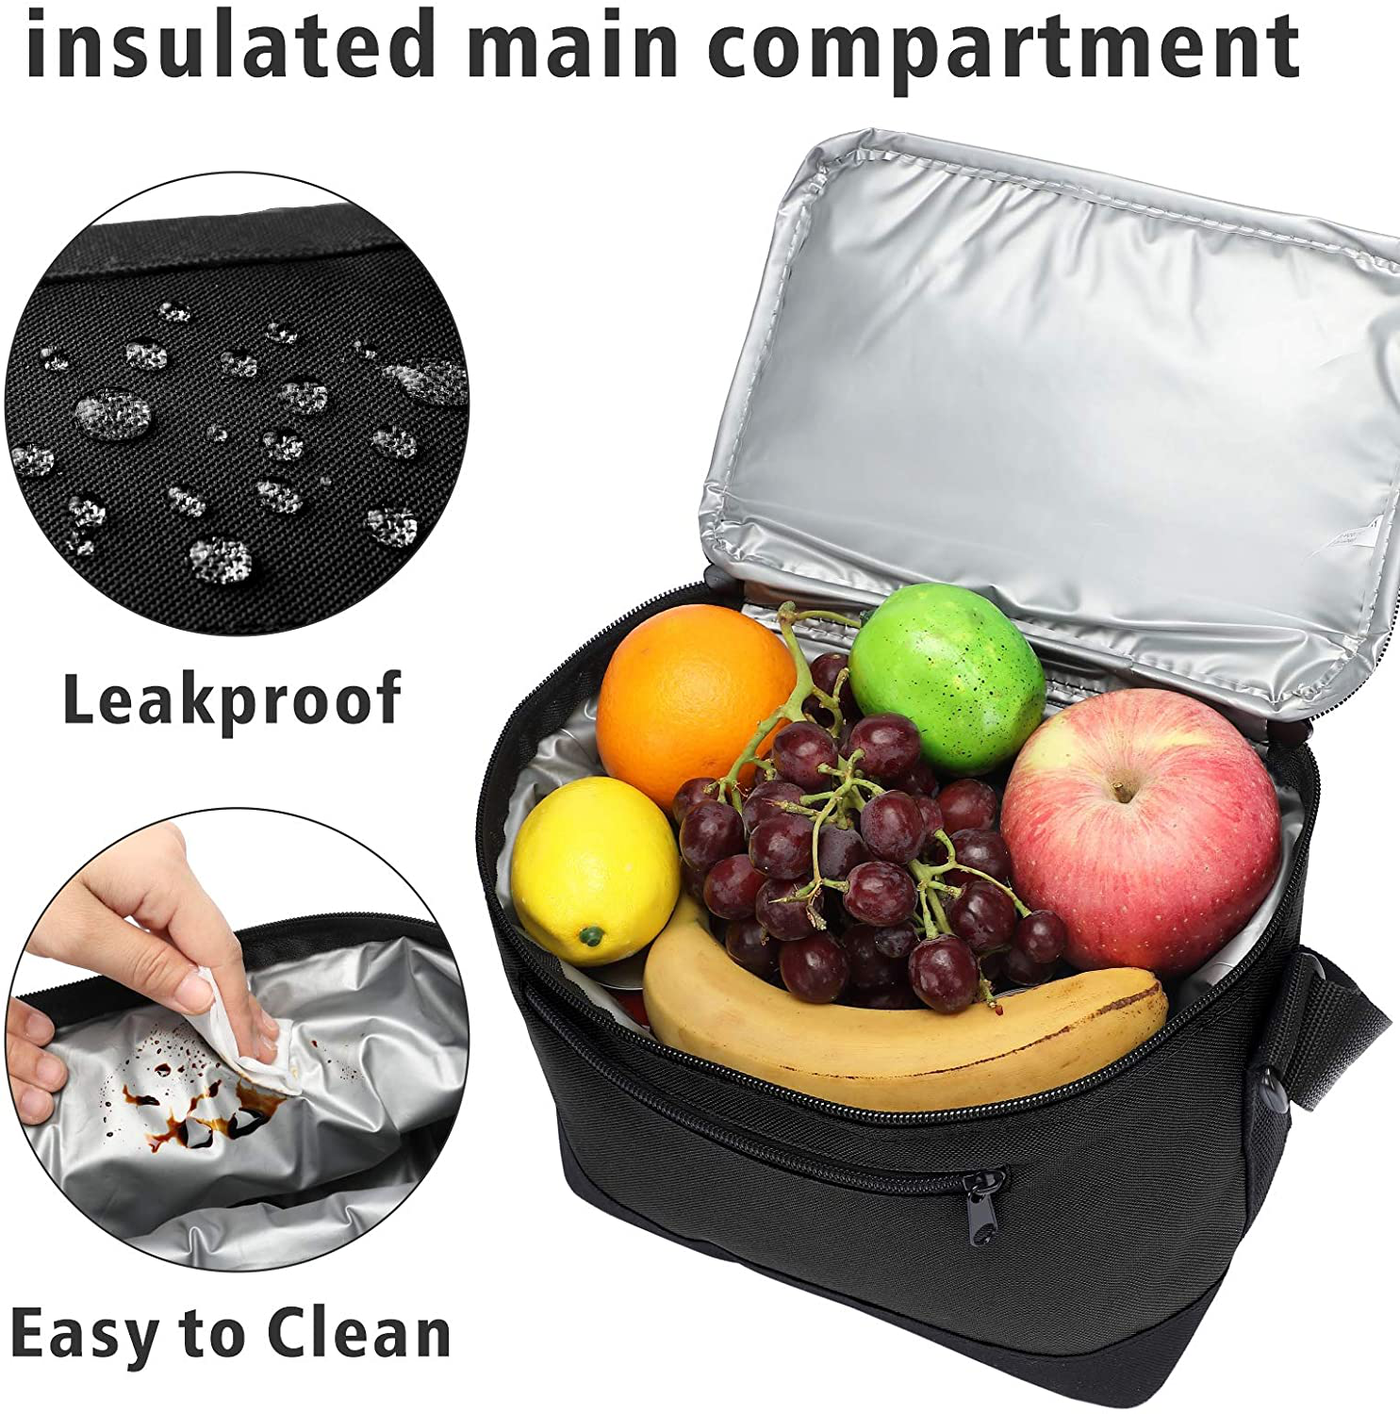 Insulated lunch Bag, AirBuyW 6 Cans Small Leak proof Insulated Cooler Box Tote Container Lunch Bag Pack With Adjustable Strap For Women Men